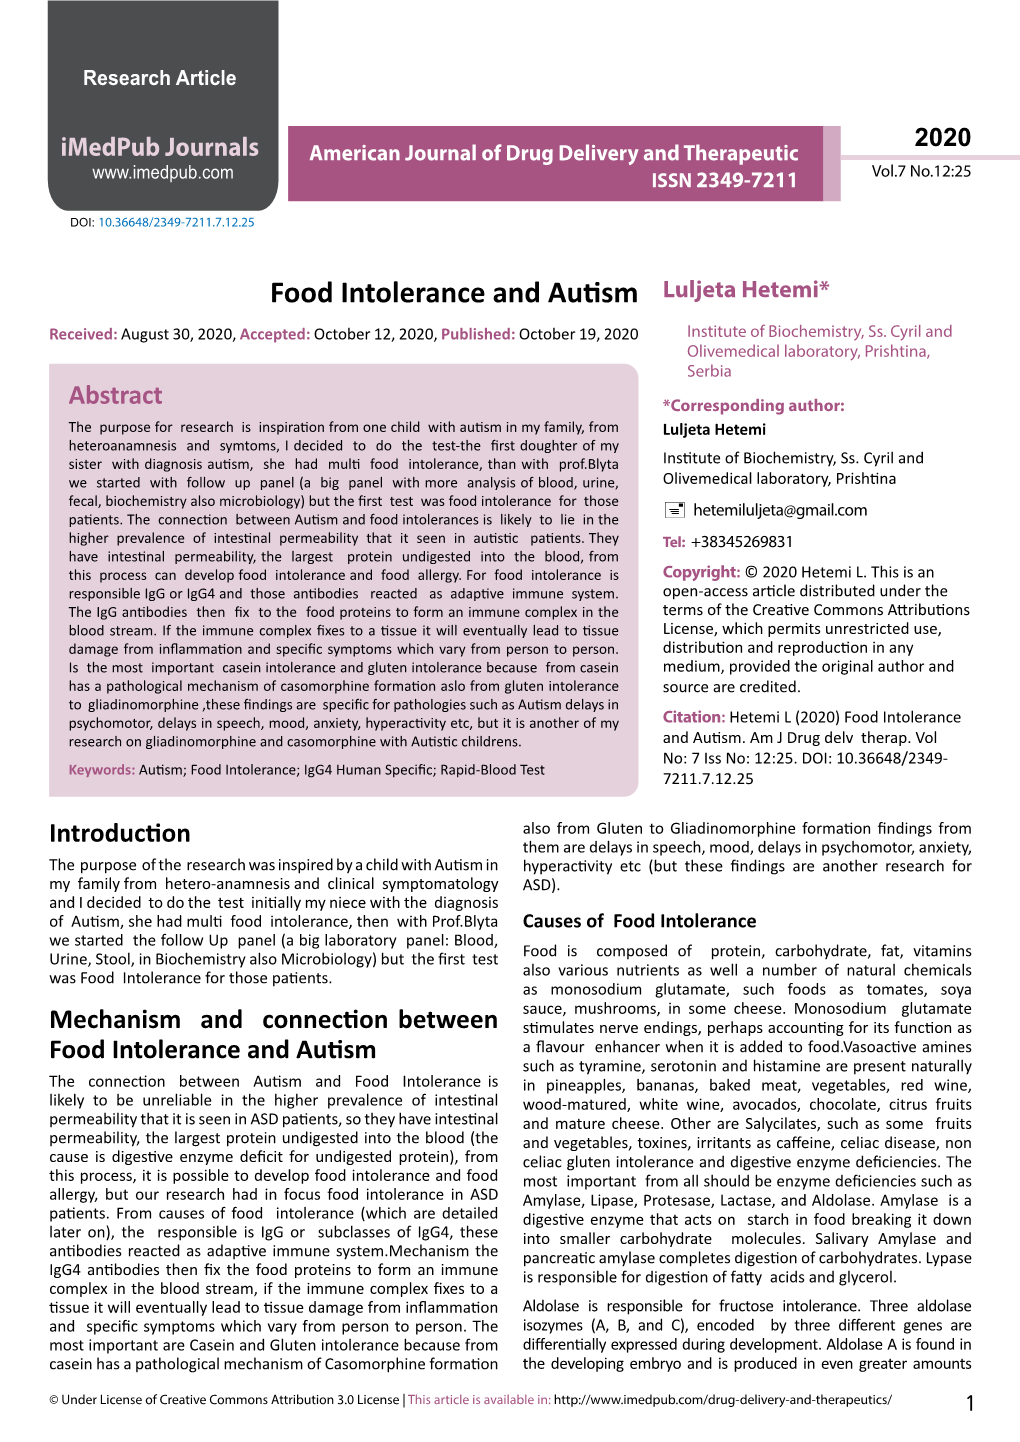 Food Intolerance and Autism Luljeta Hetemi* Received: August 30, 2020, Accepted: October 12, 2020, Published: October 19, 2020 Institute of Biochemistry, Ss